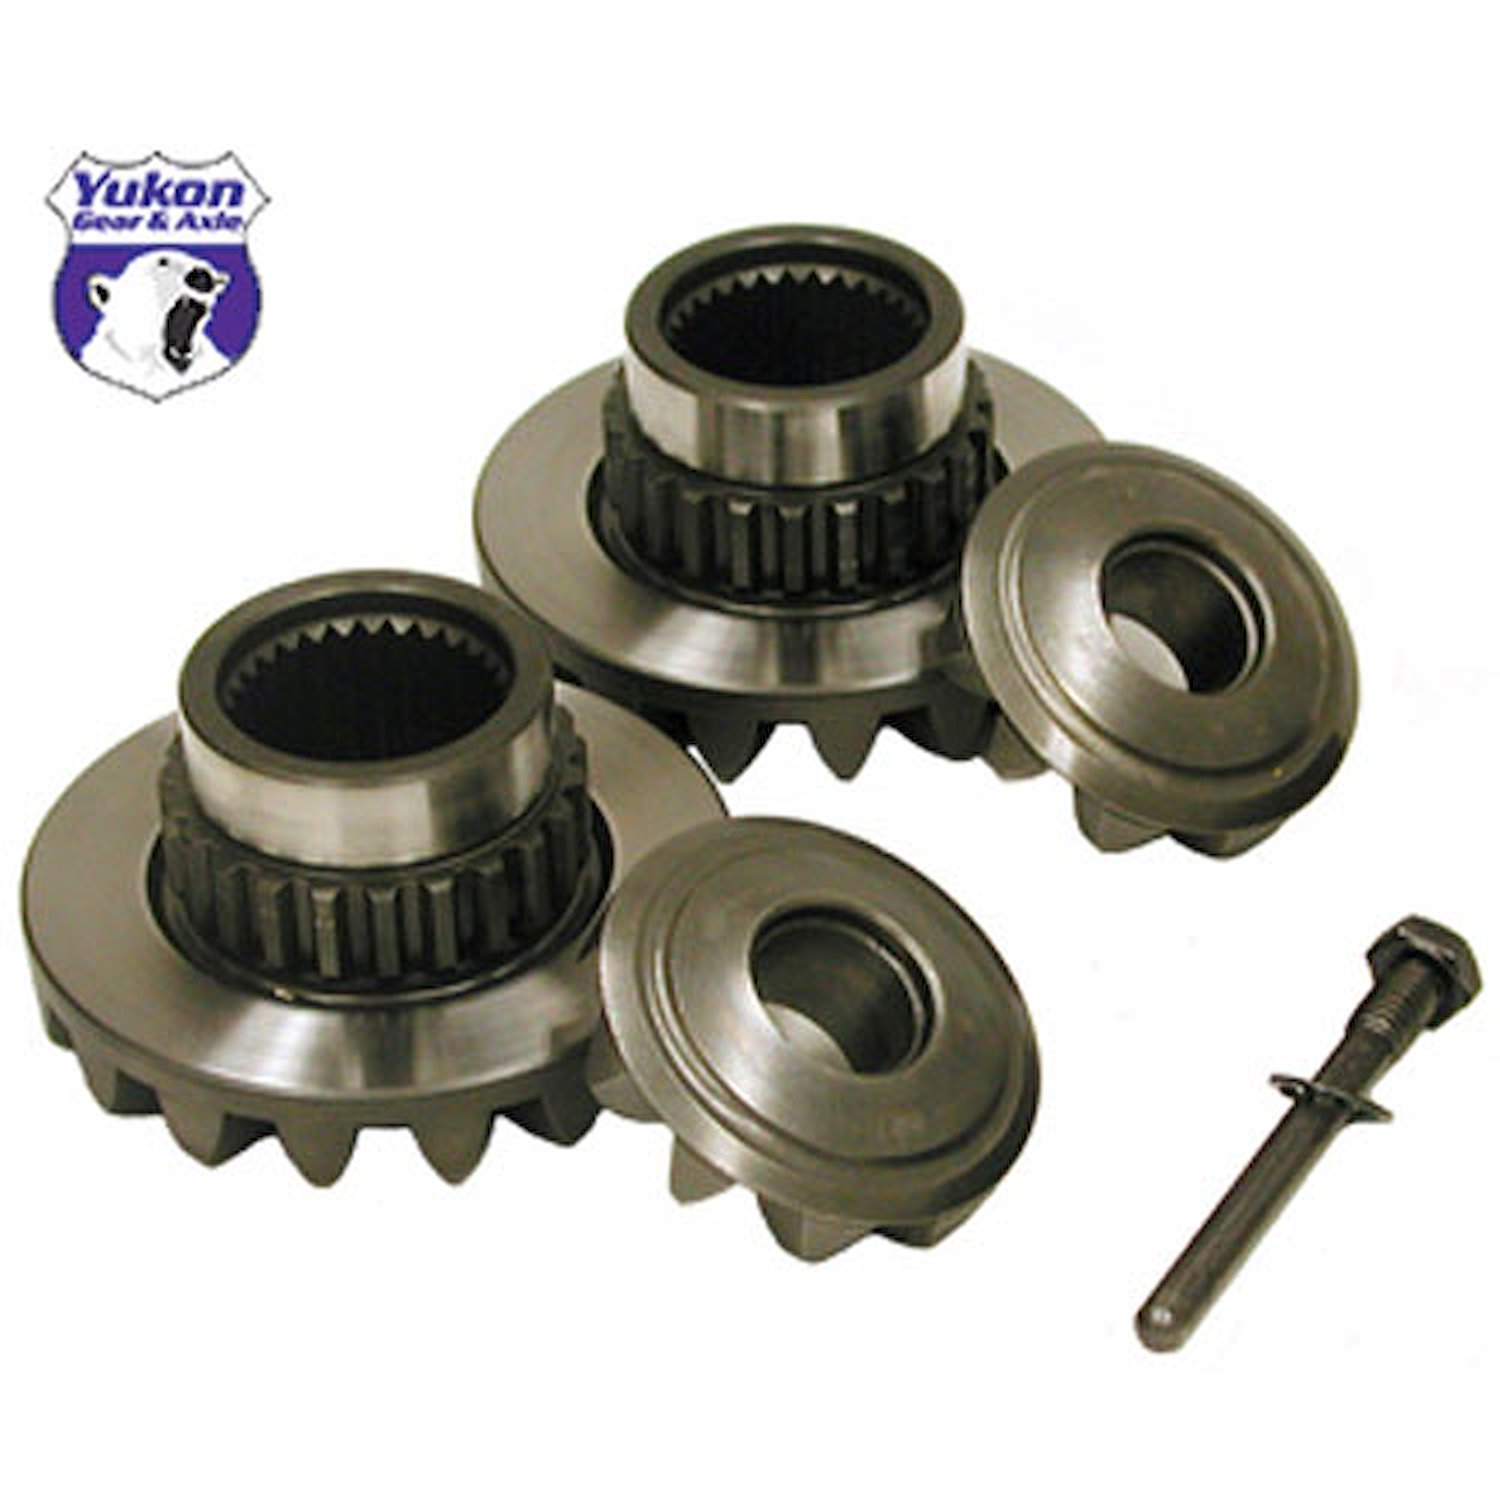 Standard Spider Gear Kit Ford 8.8" Trac Loc Positraction